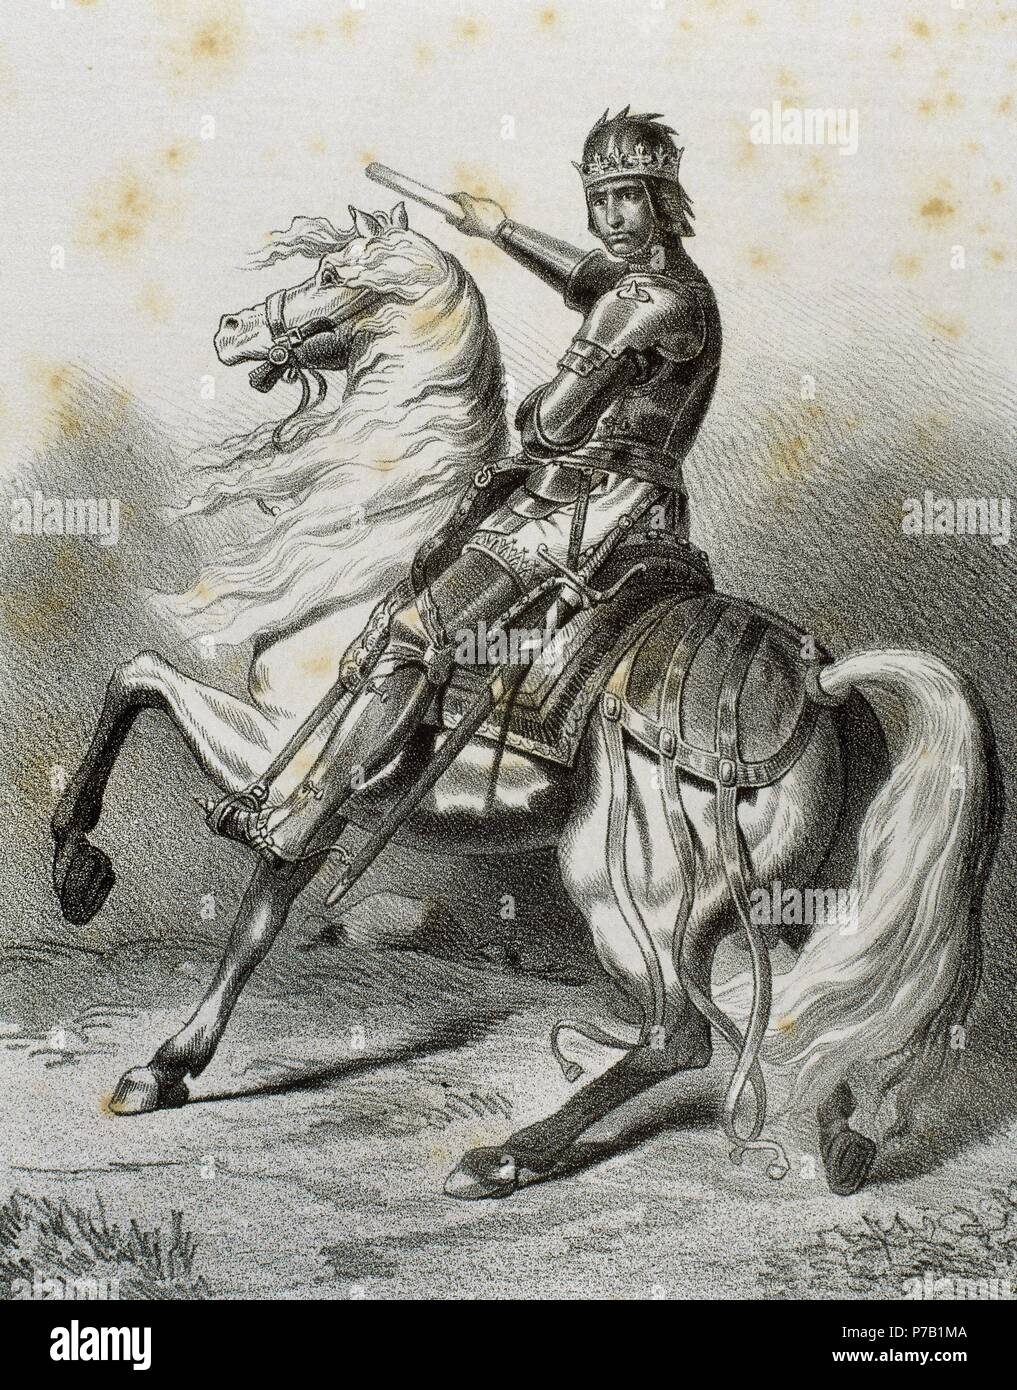 Alfonso V of Aragon, called The Magnanimous (1396-1458). King of the Kingdom of Aragon and Naples. Alfonso the Magnanimous on horseback. Engraving in Spain Illustrated History, 19th century. Stock Photo